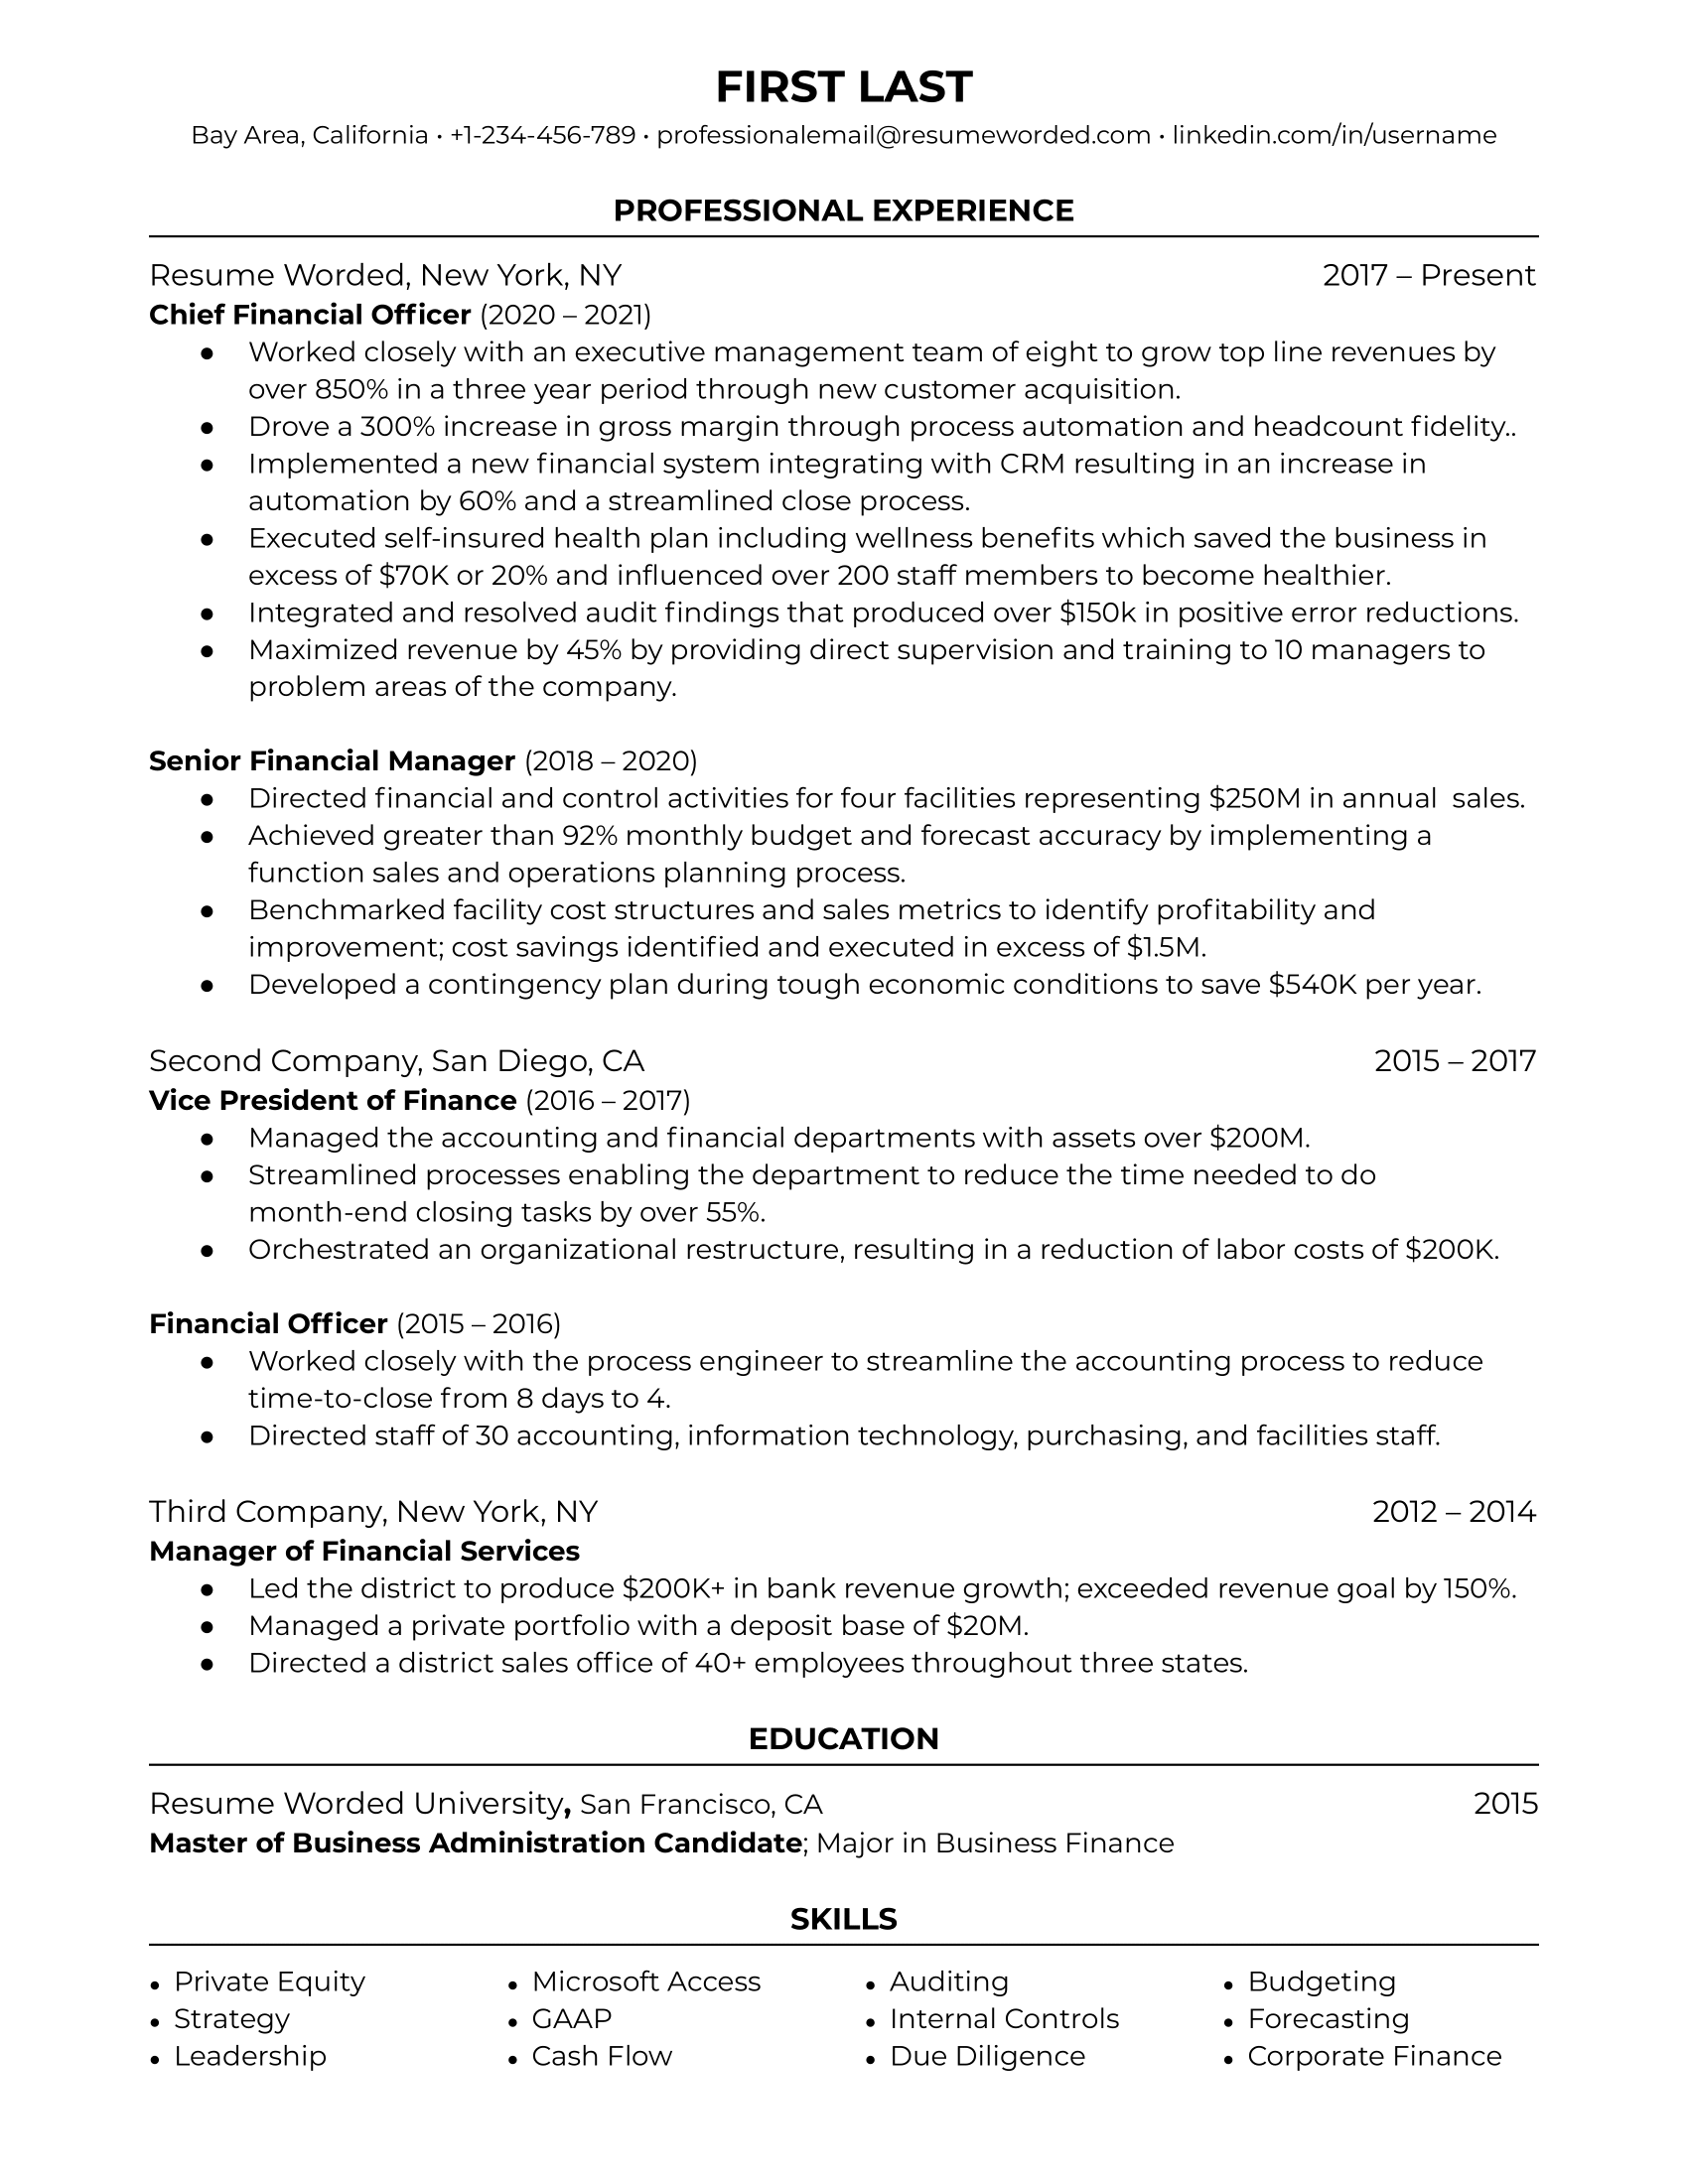 Chief Financial Officer resume template example focused on finance experience and showing career growth through promotions